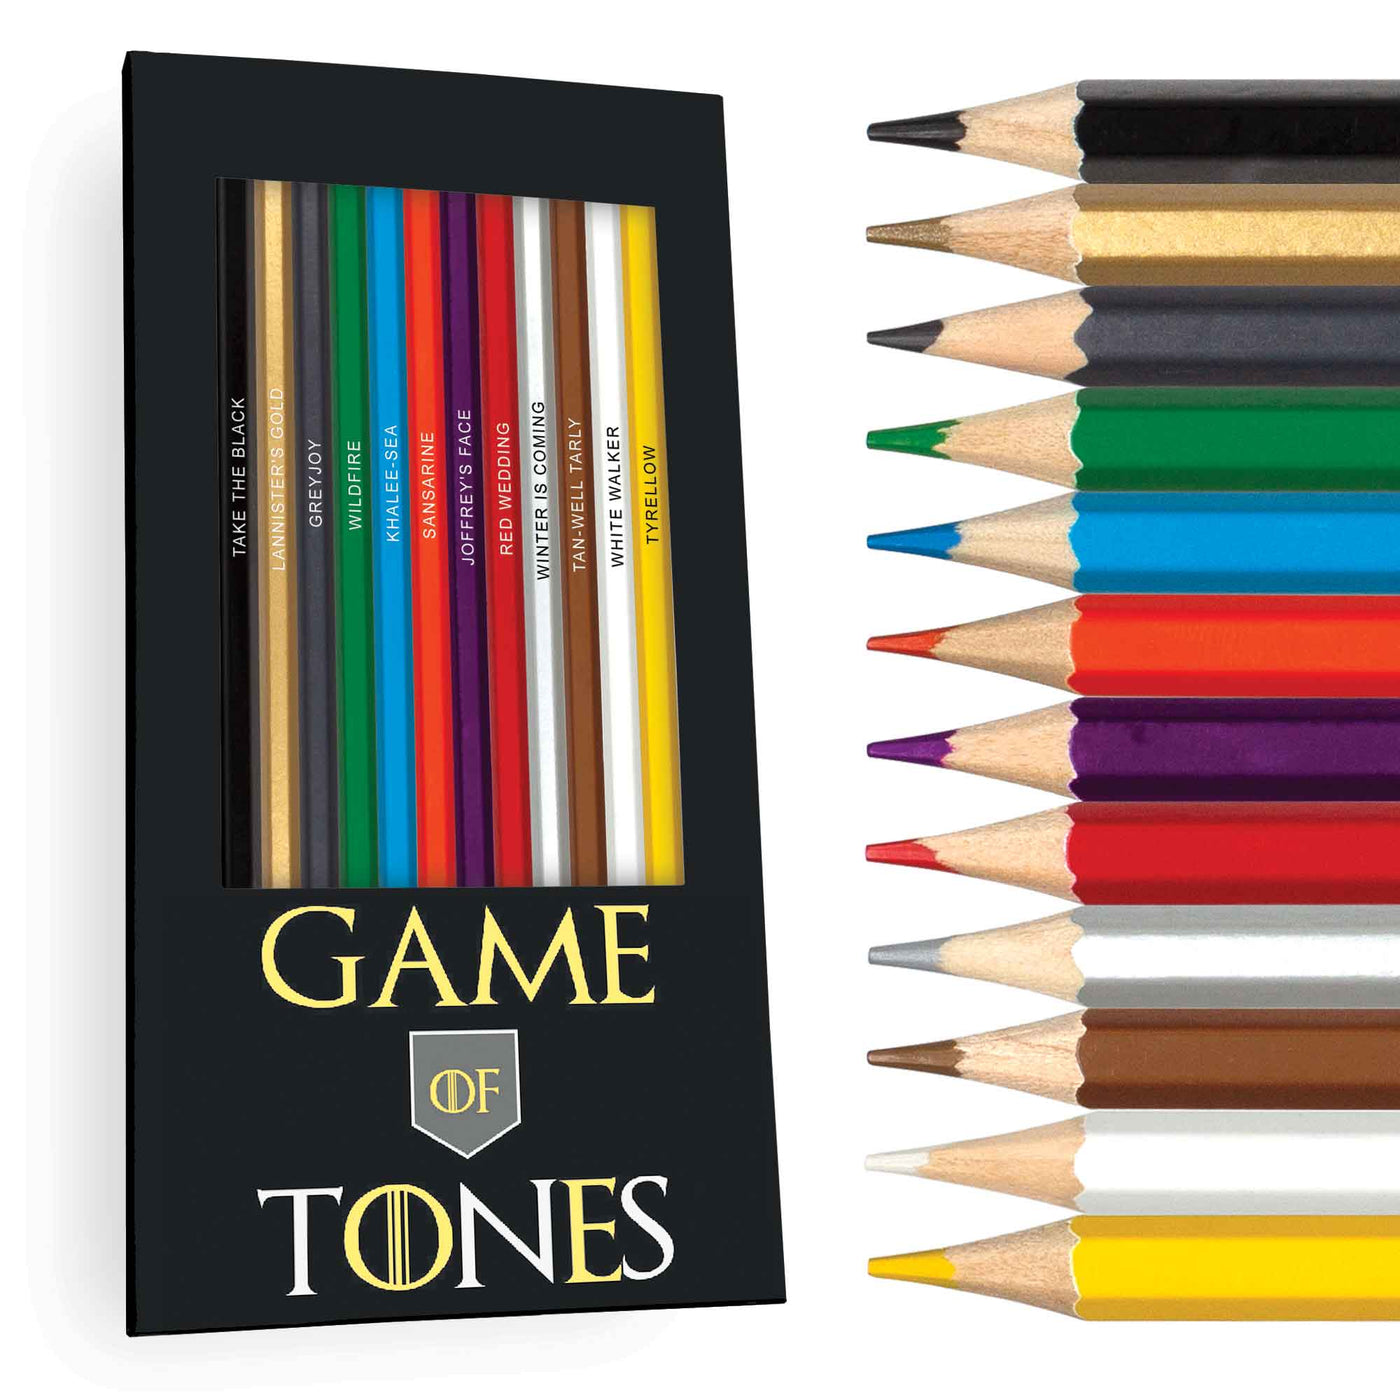 Game of Tones Colored Pencils for Fans of Game of Thrones Box and Pencils